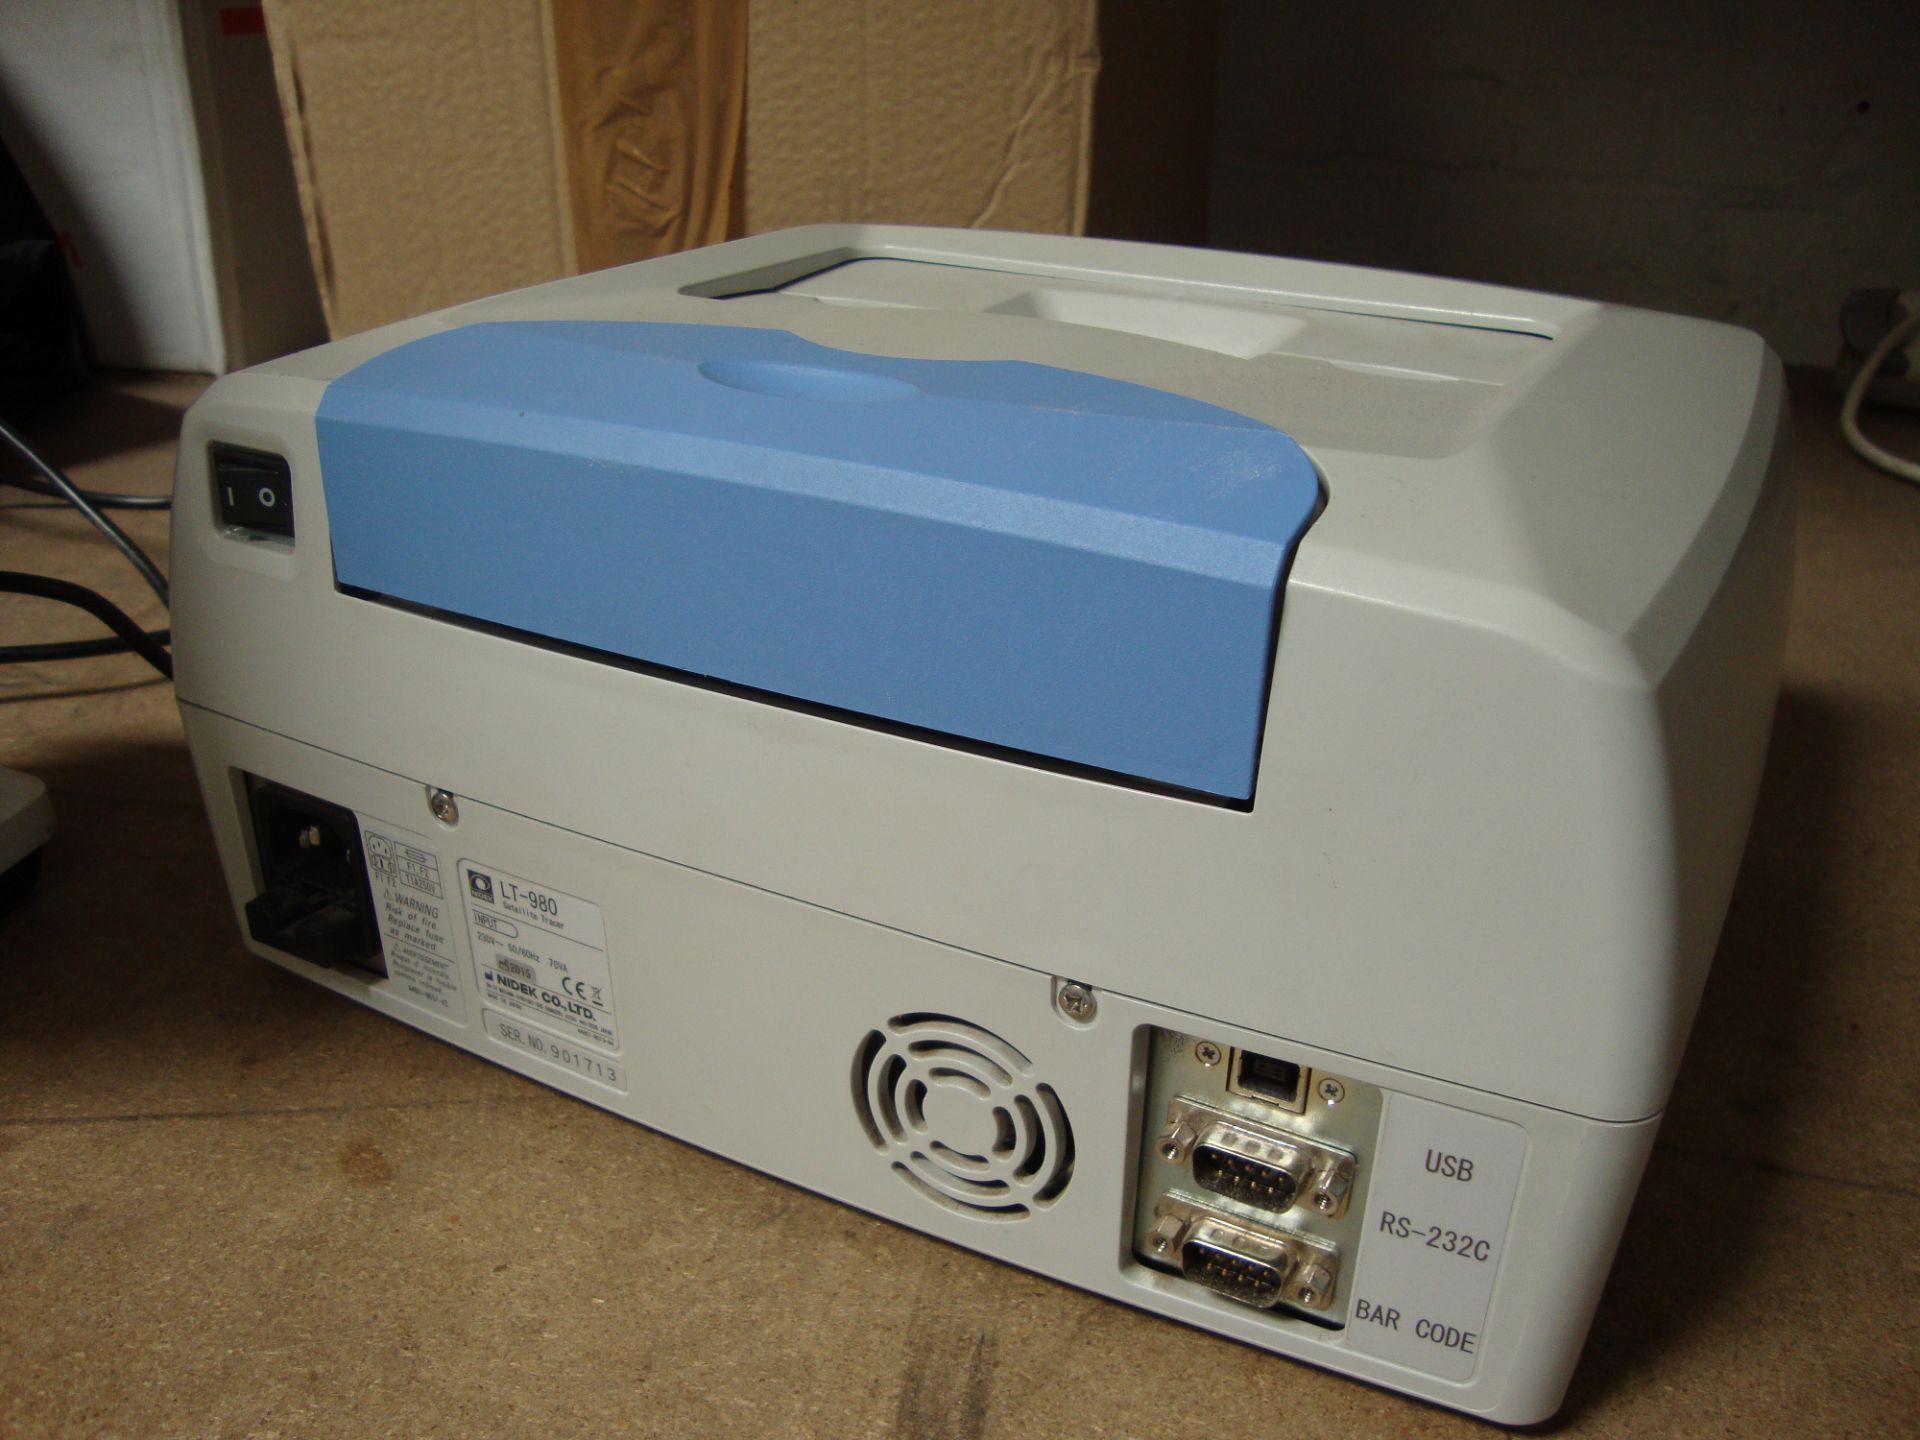 Nidek satellite tracer LT-980 All the lots in this auction are being sold on behalf of Galaxy - Image 3 of 4